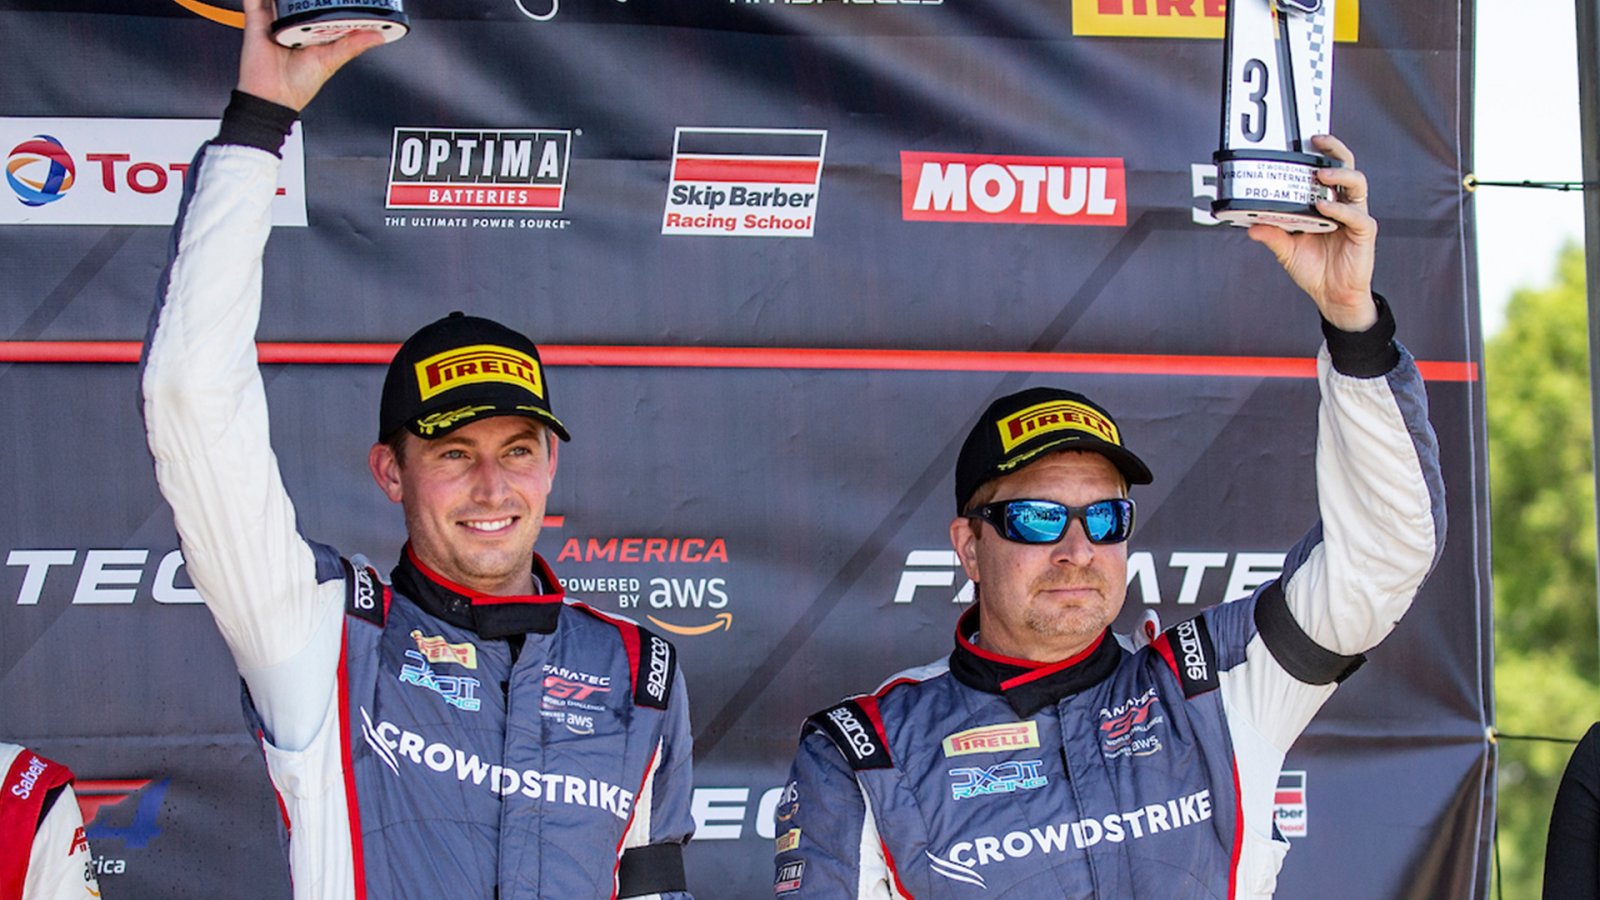 Never Stop Learning: CrowdStrike Racing Takes Positives from VIR